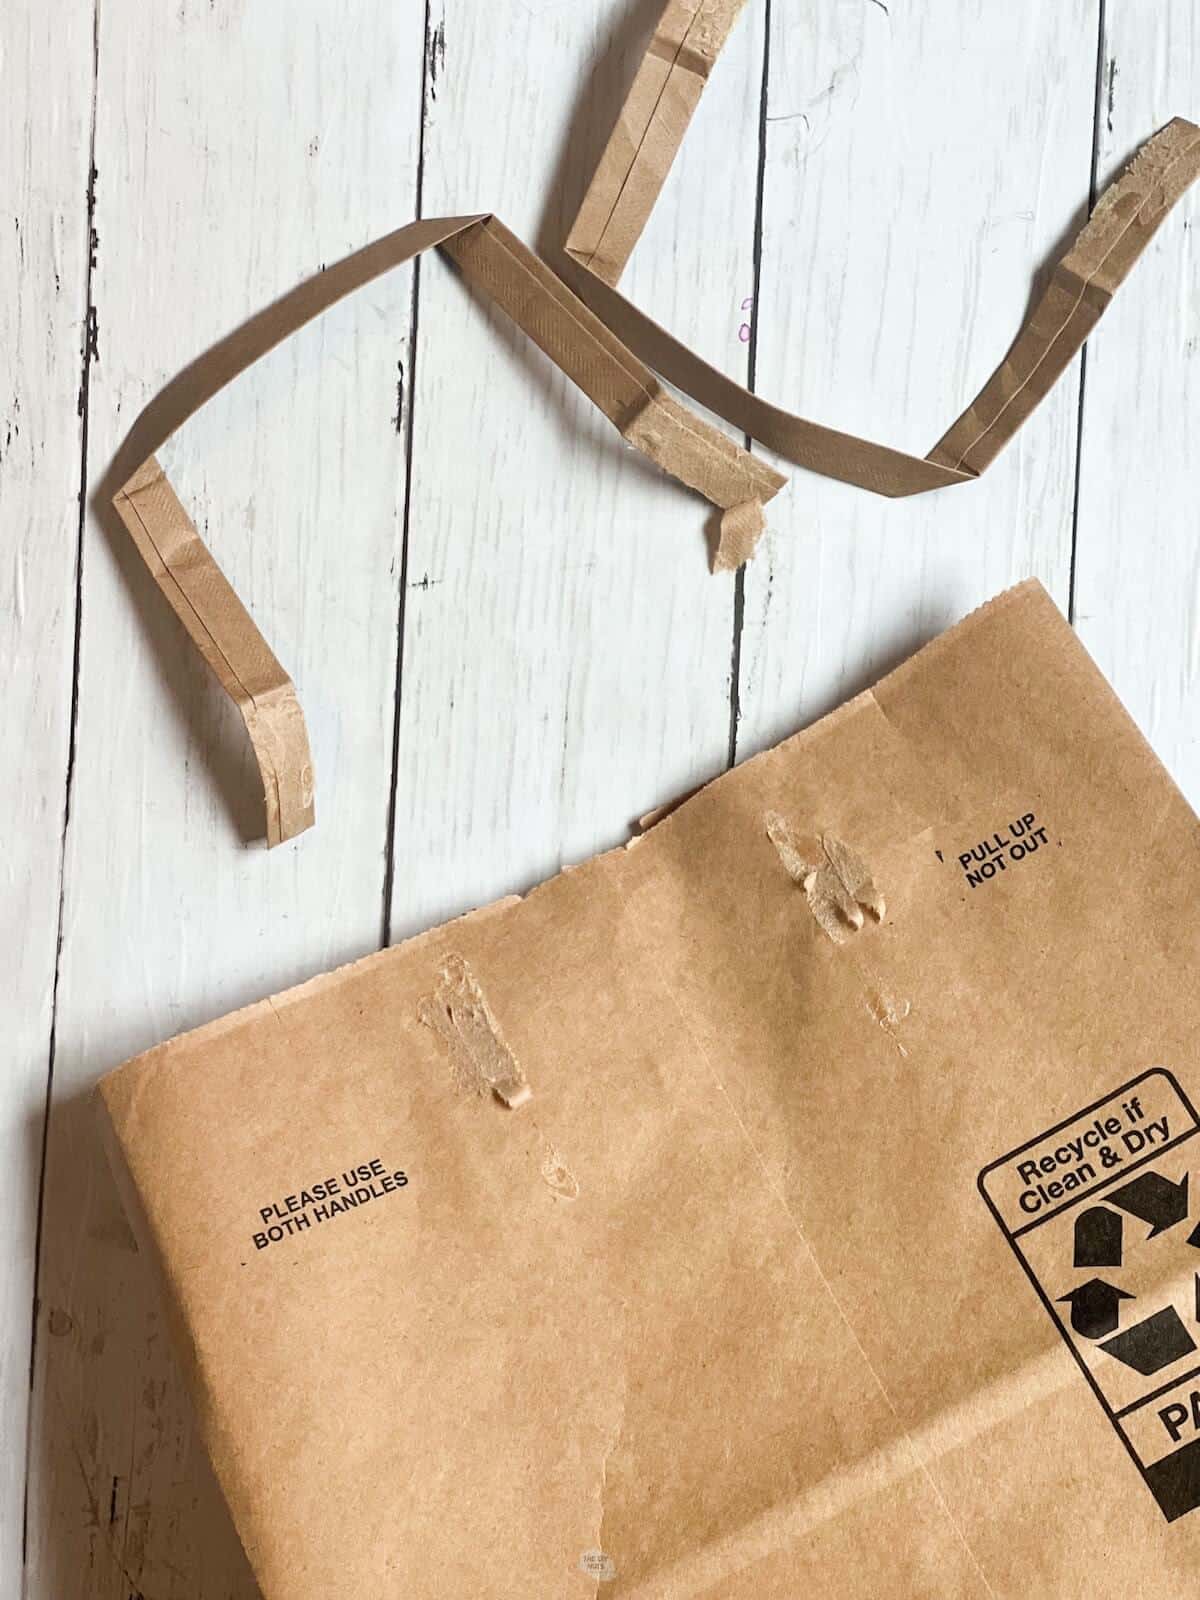 handles removed from brown paper bag.